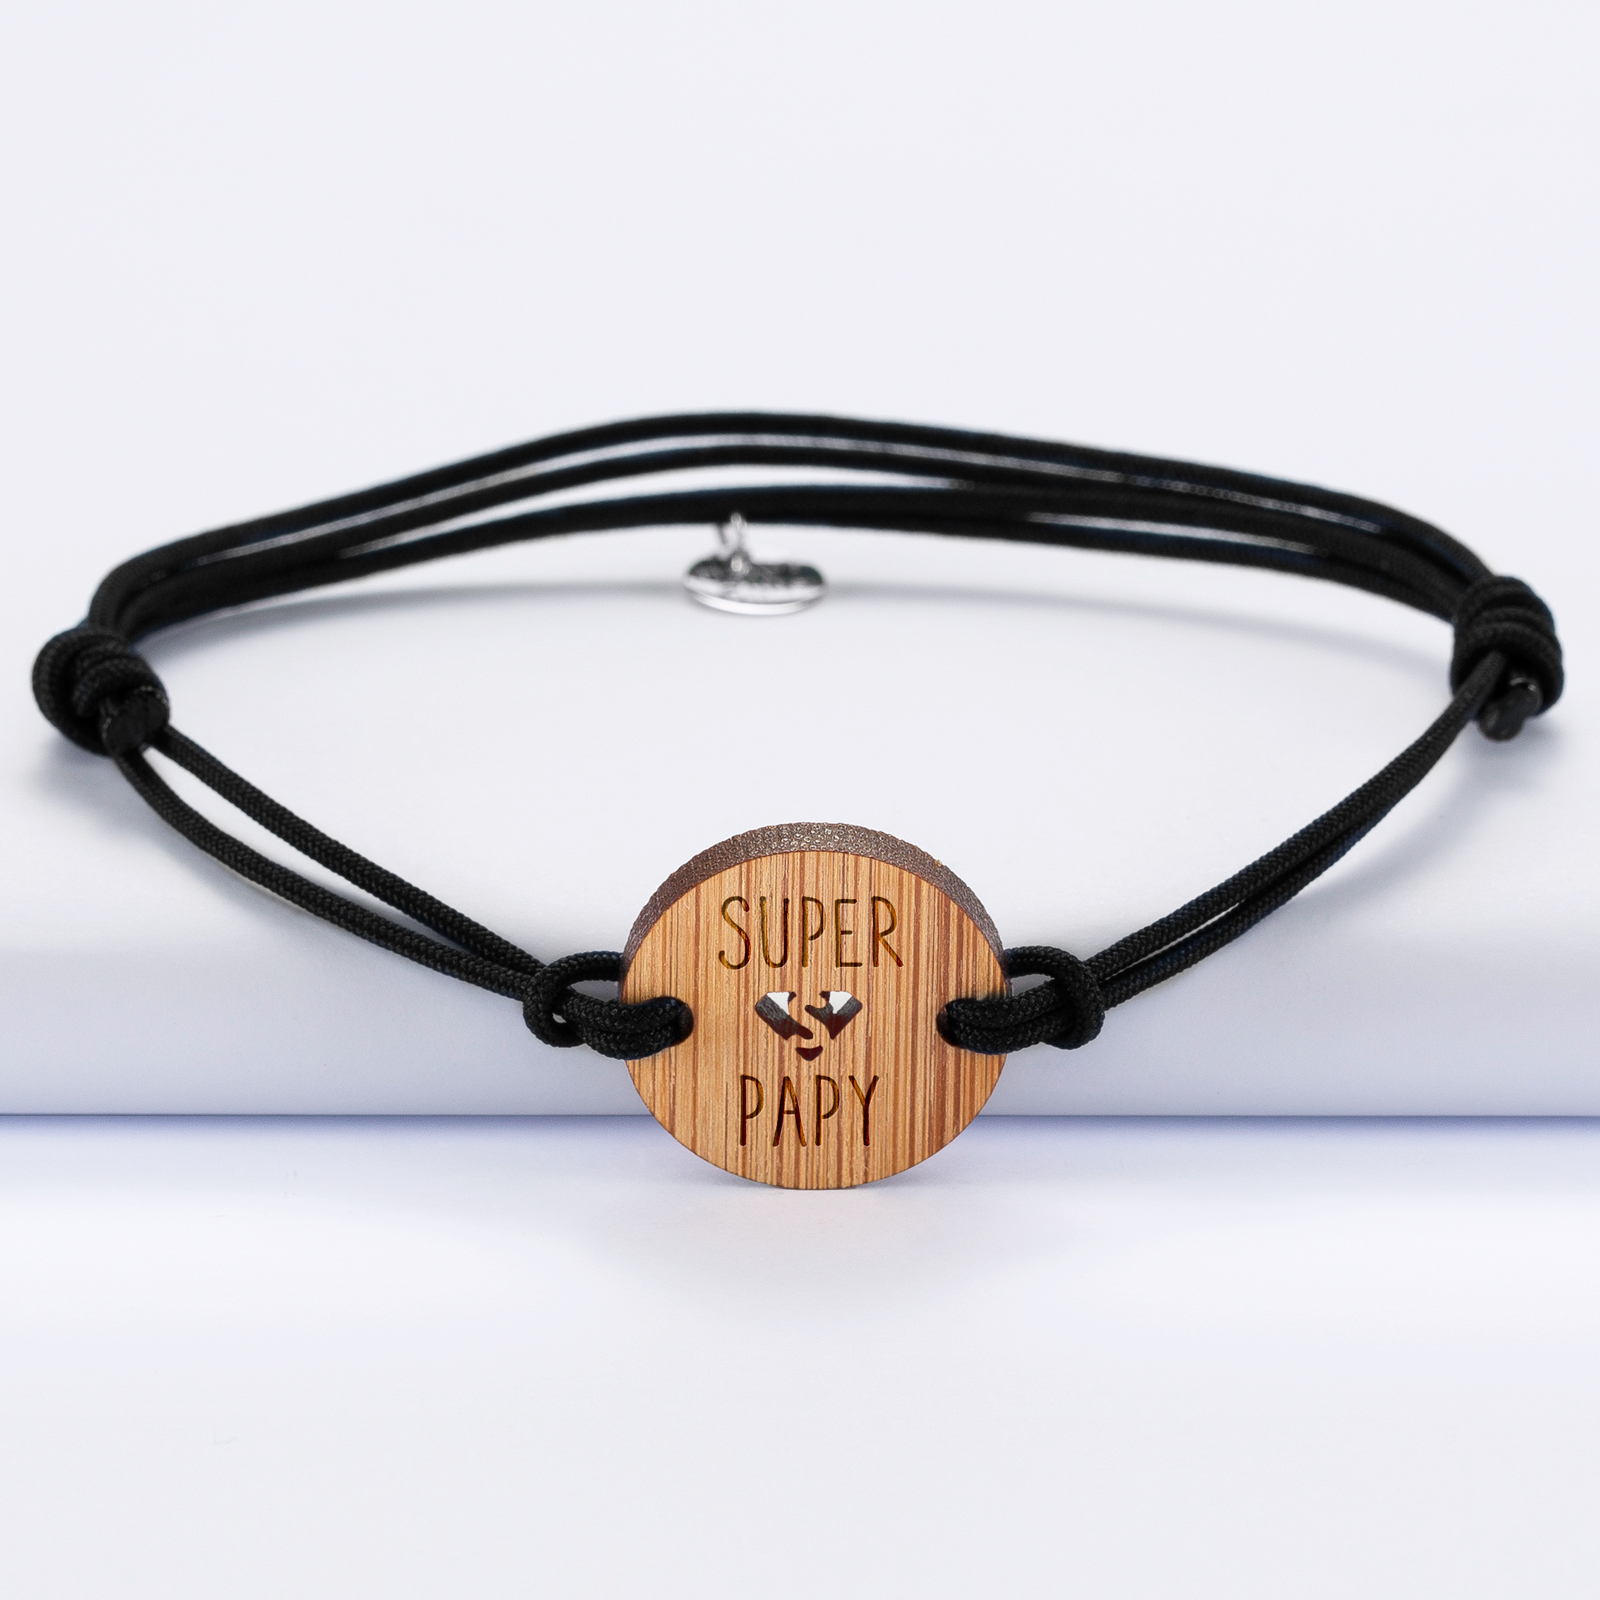 Men's personalised engraved round wooden medallion bracelet 21mm - special edition "Super Papy"